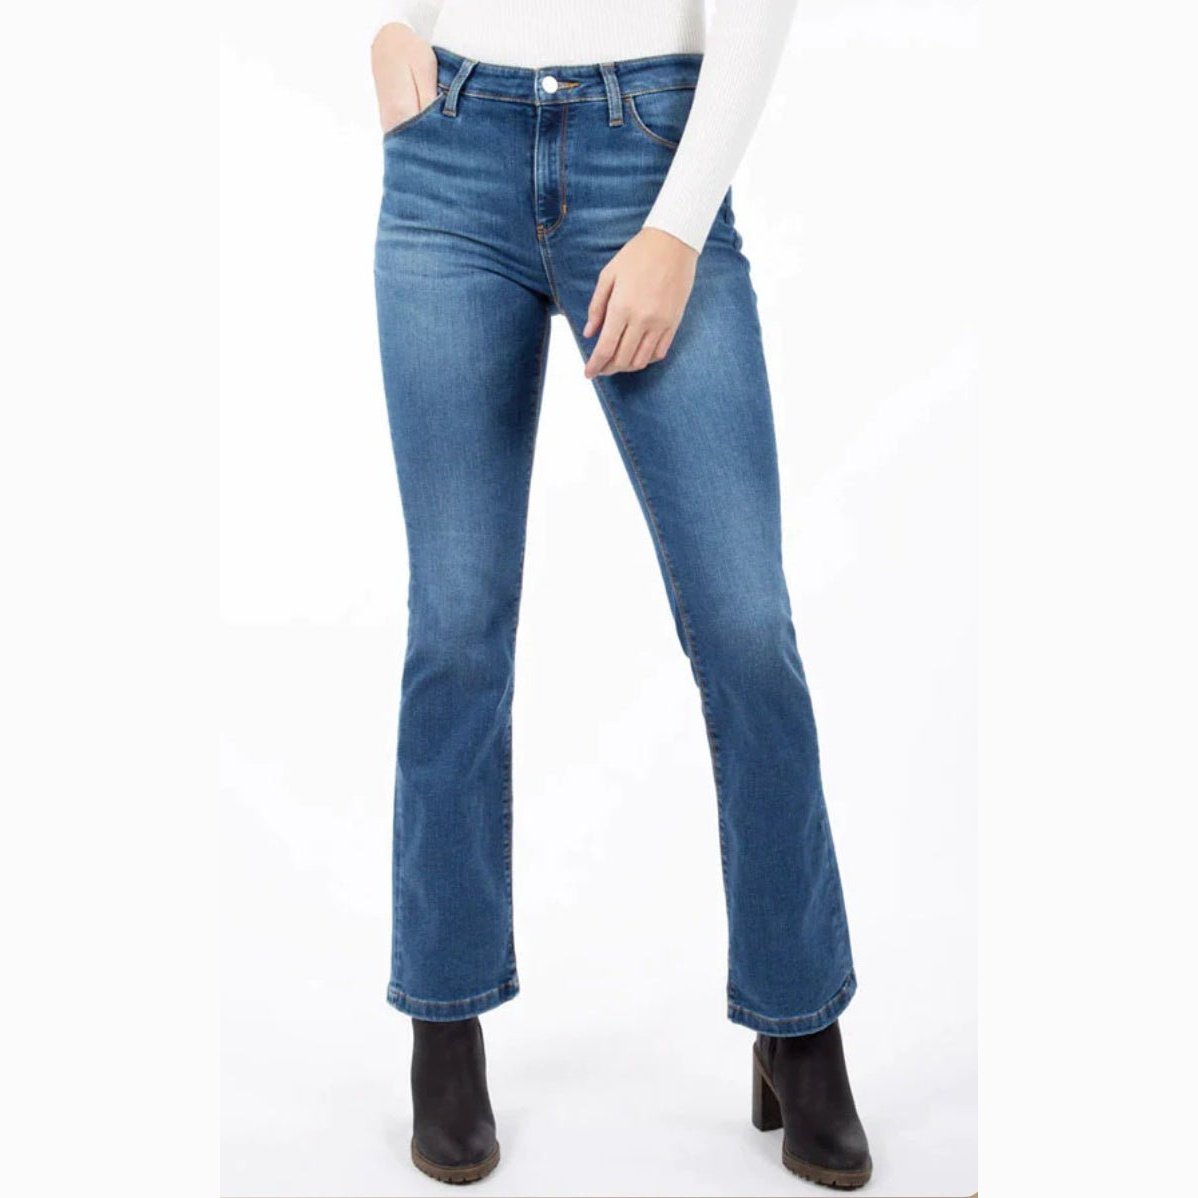 Guess Women’s Guess Sexy Boot Mid Rise Jeans - Guess